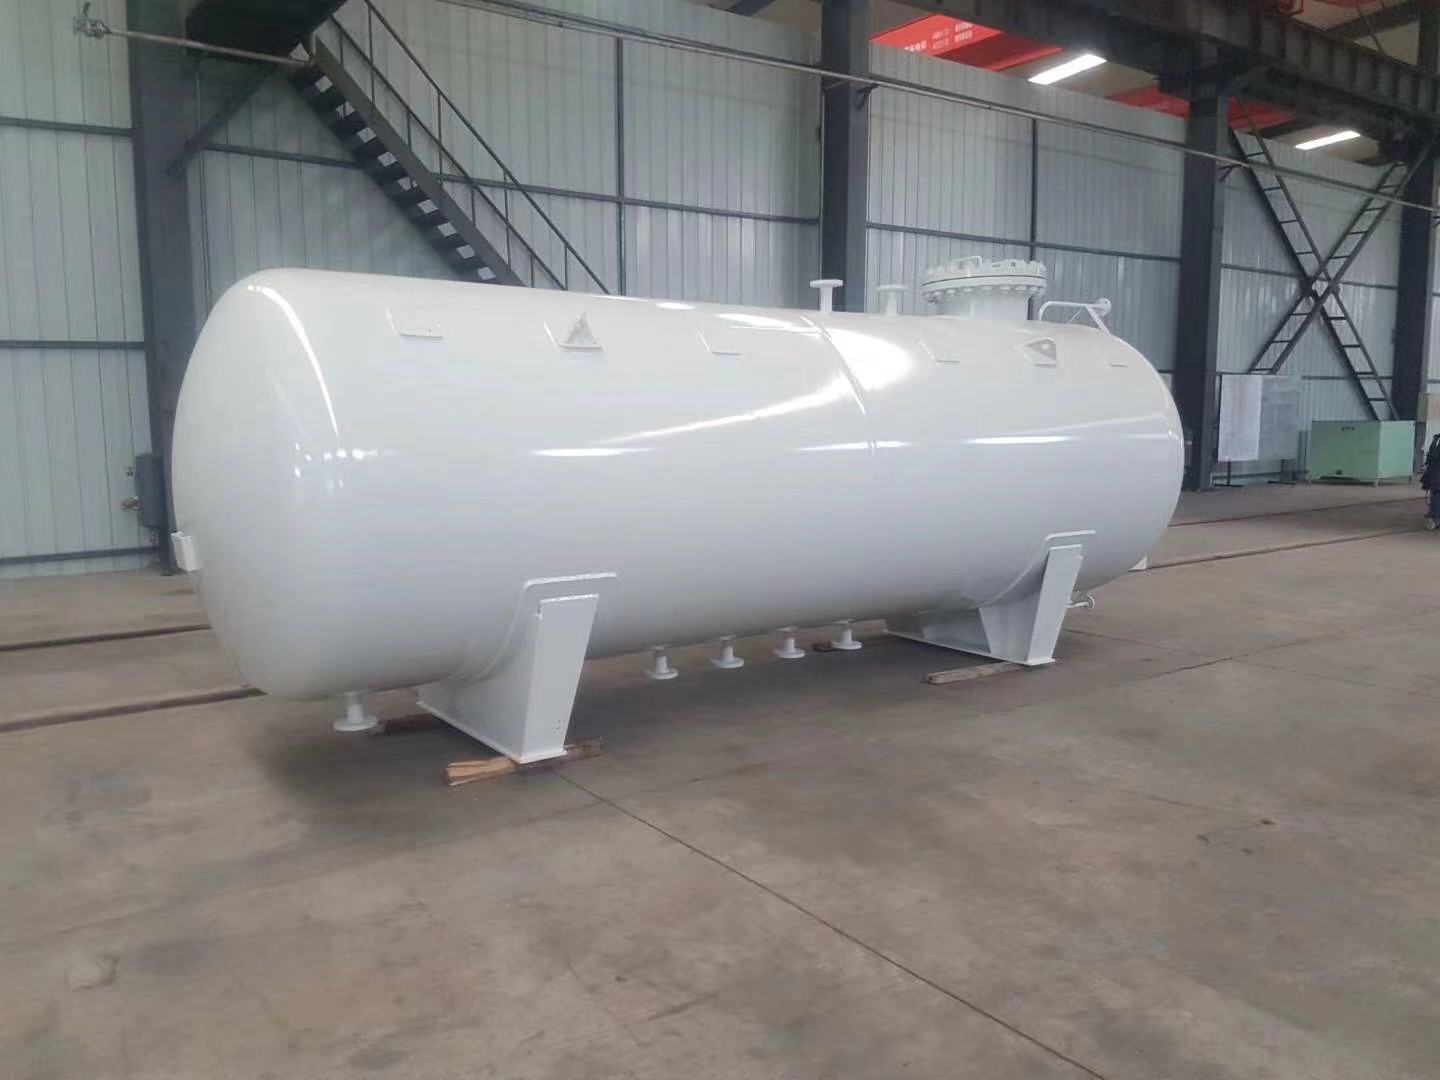 Liquefied gas storage tanks meet the requirements for safe use